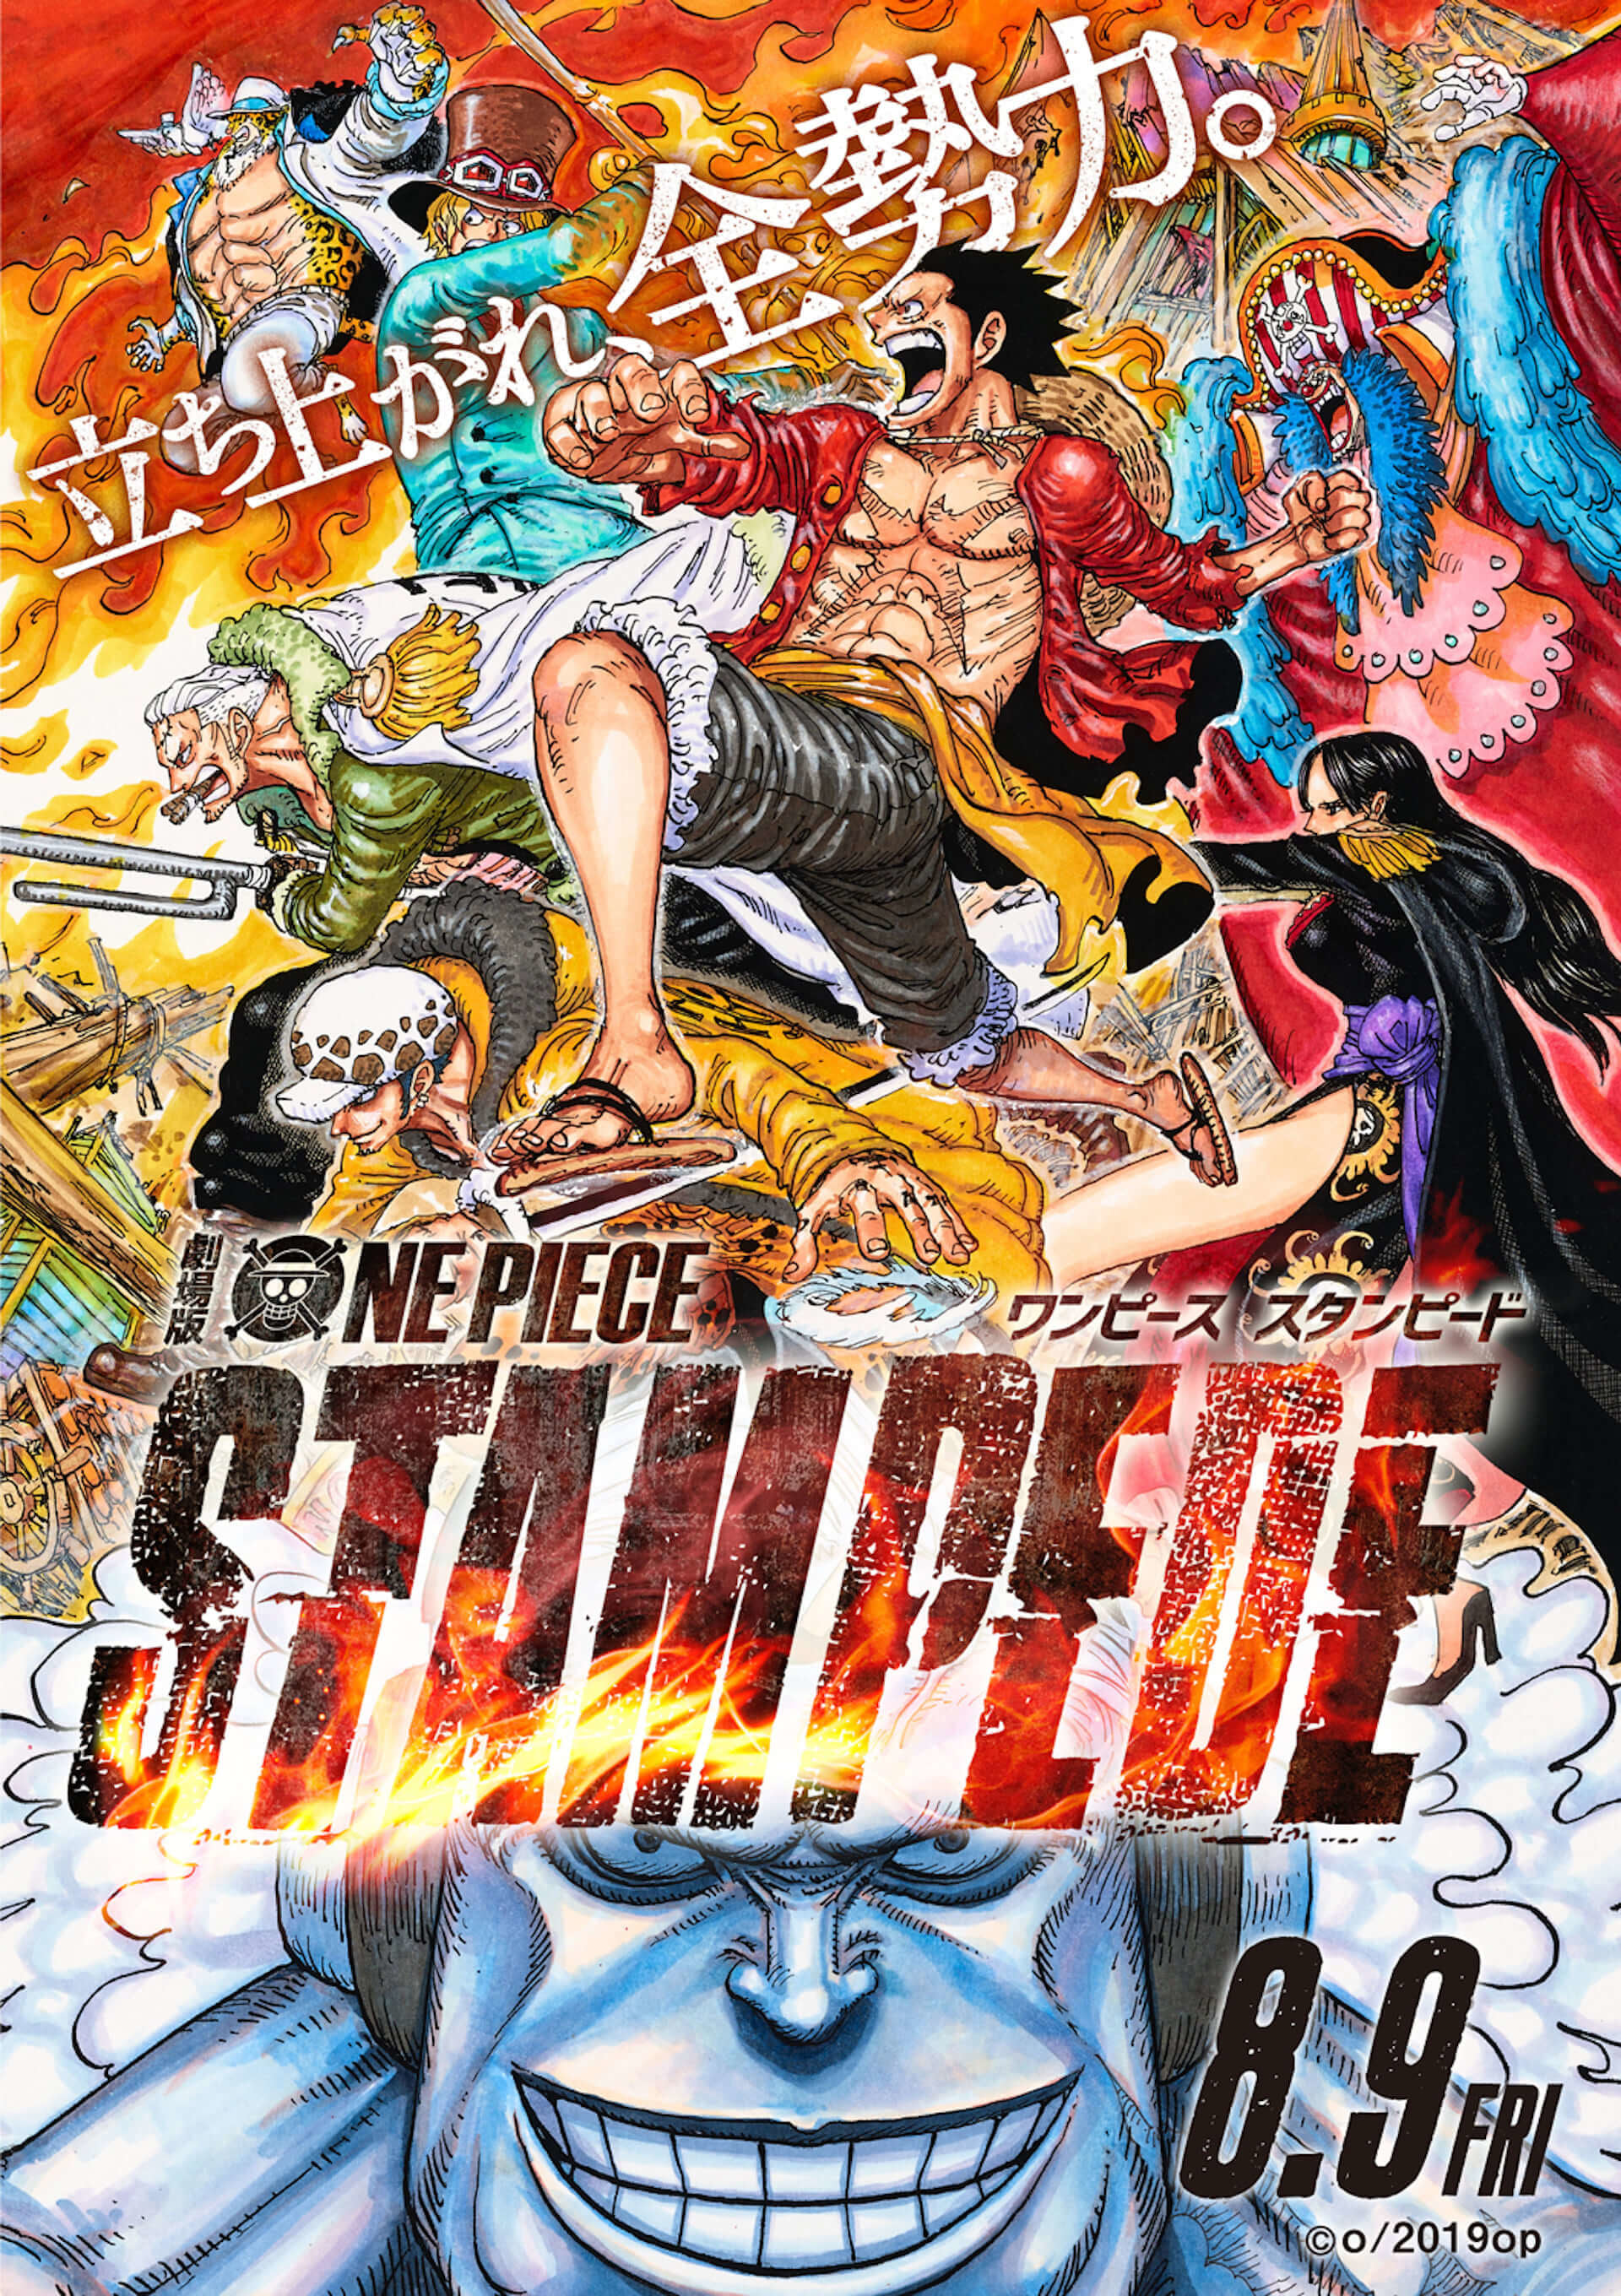 『ONE PIECE STAMPEDE』興収50億突破に尾田栄一郎喜び爆発「50億突破！！ですってよー！！」 film190909_onepiece_stampede_3-1920x2720